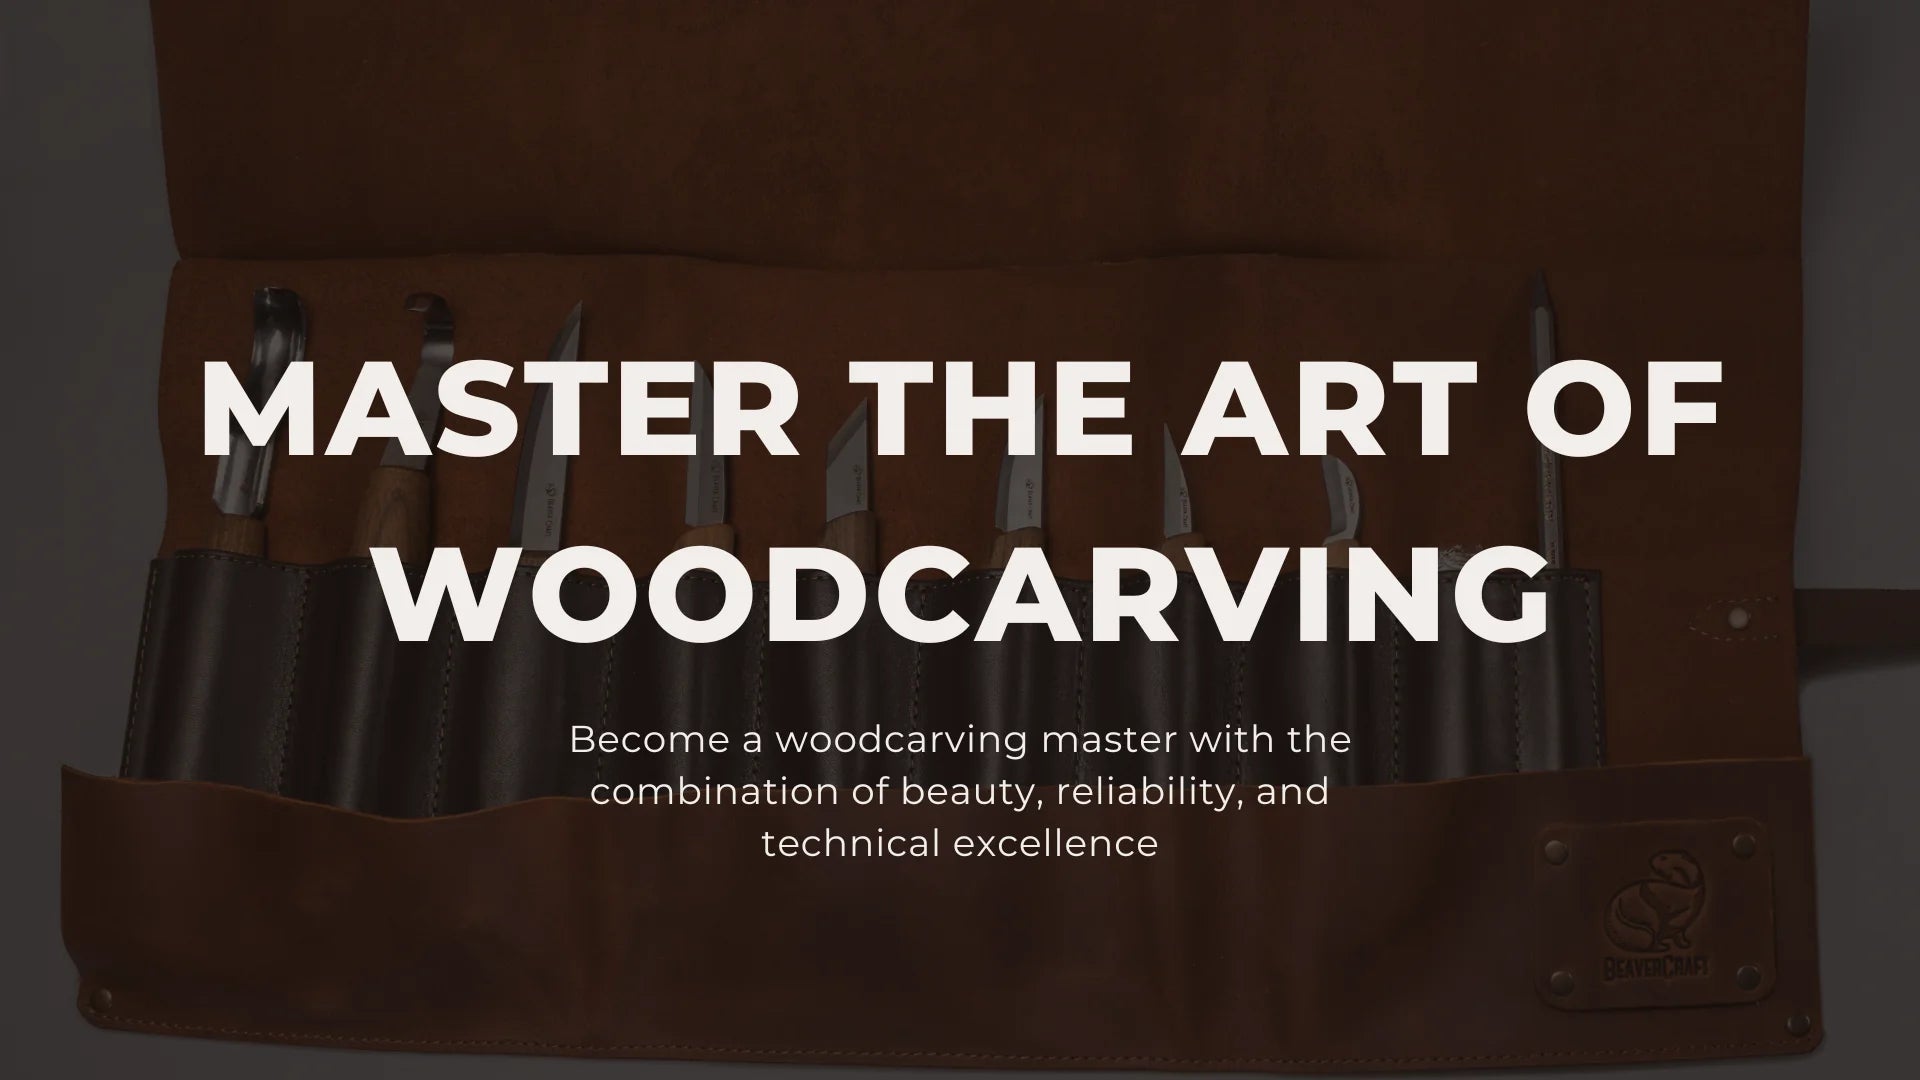 Art of woodcarving